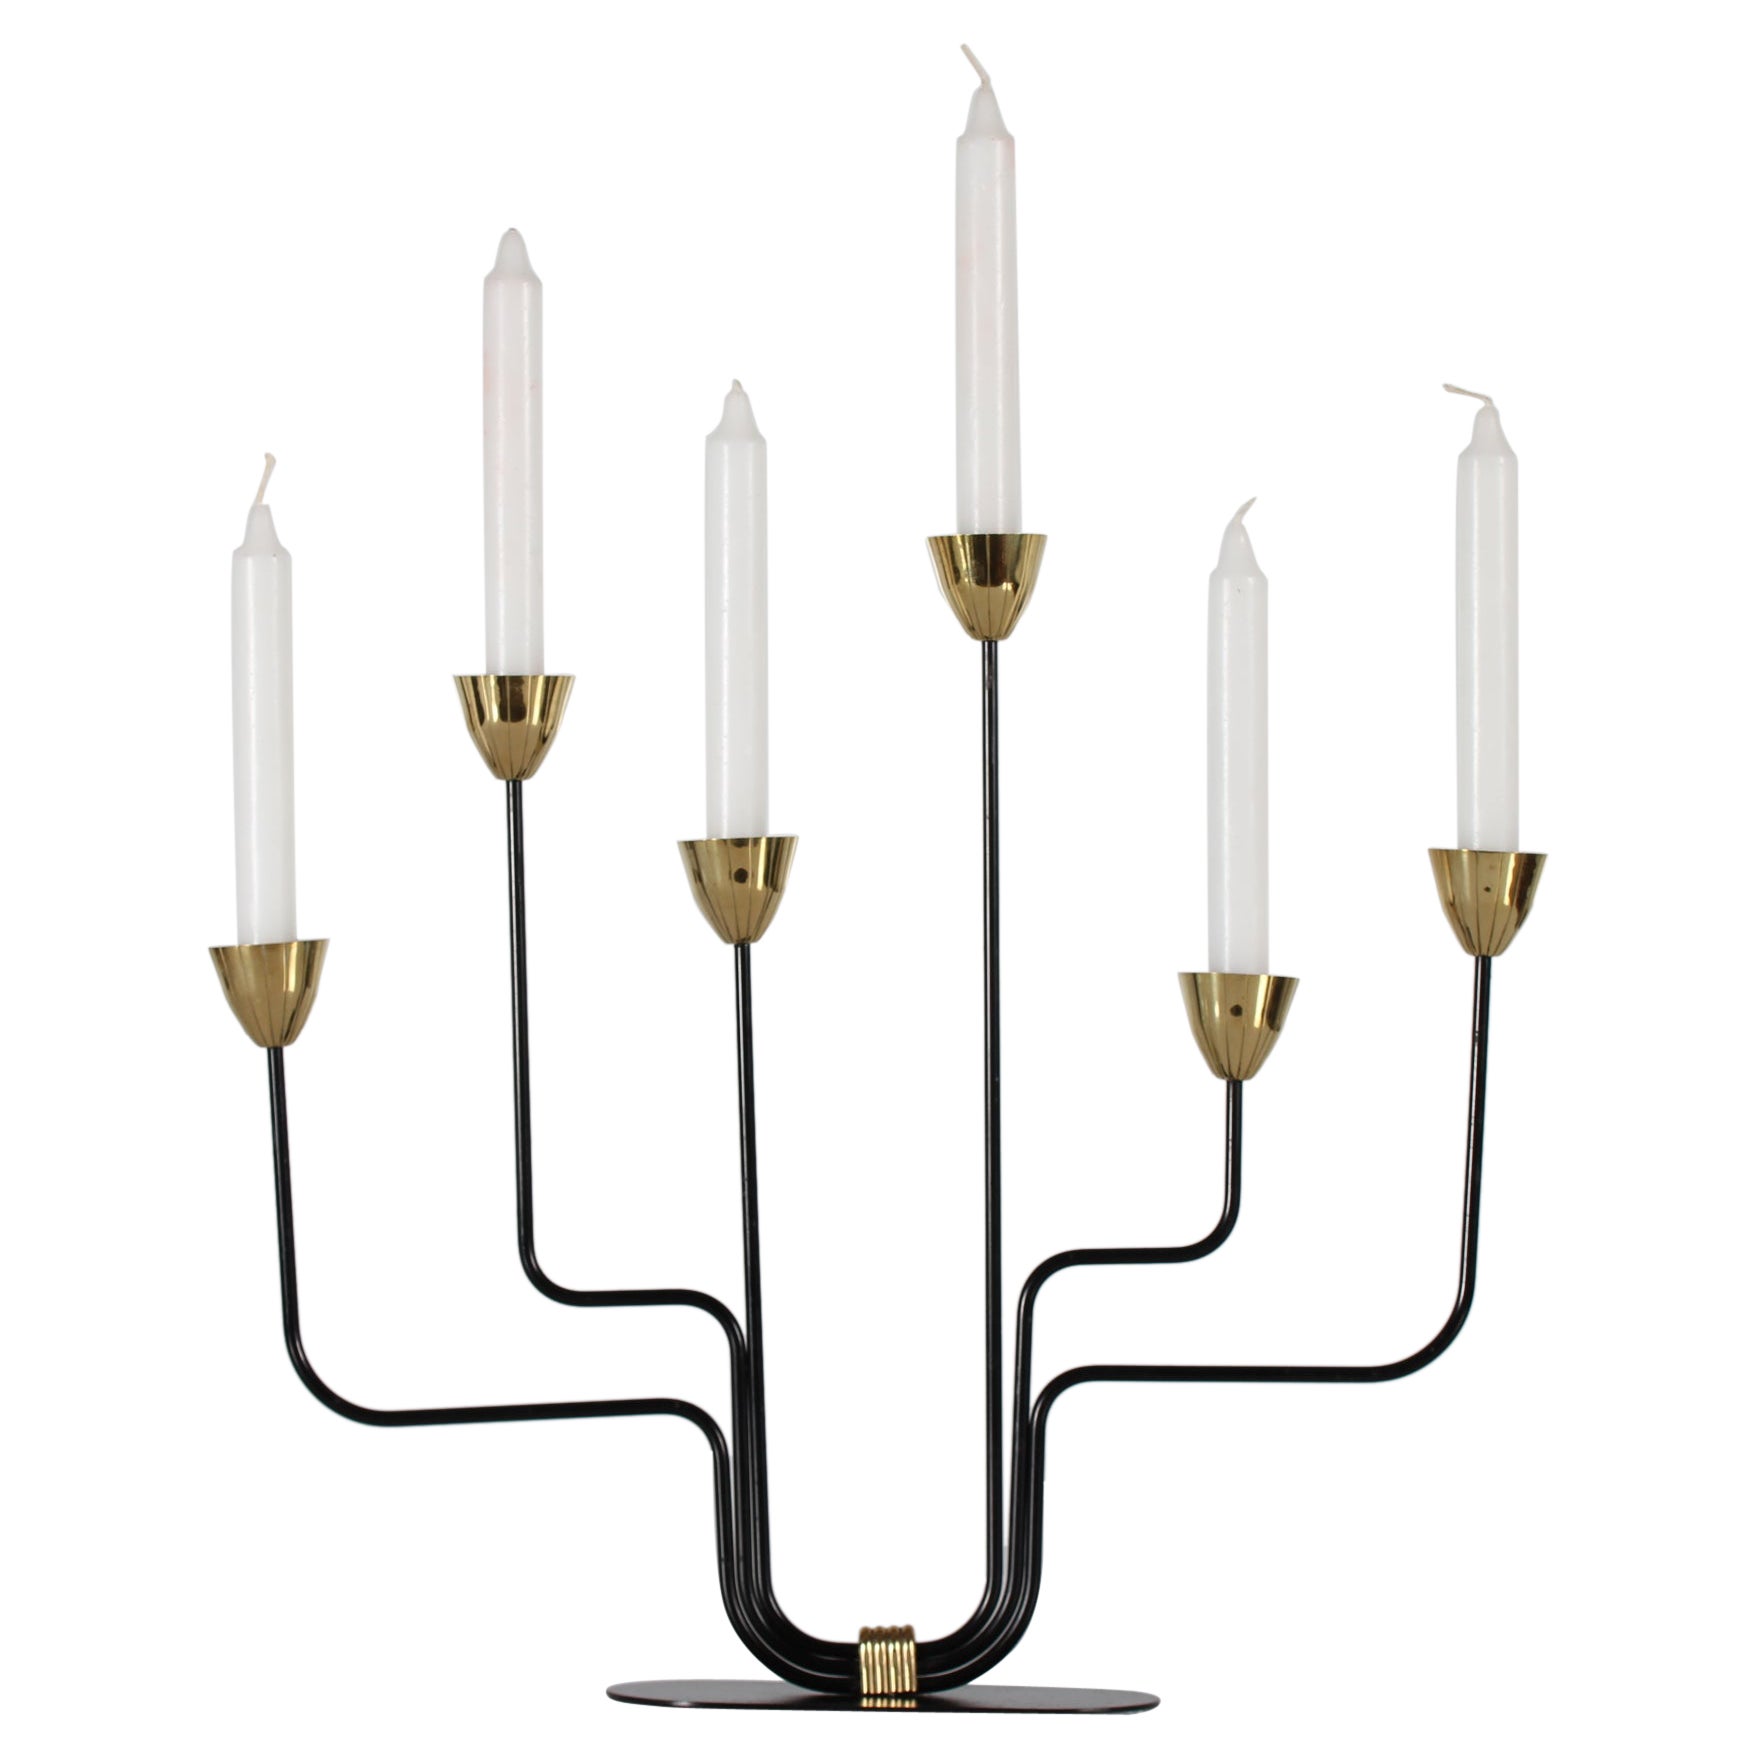 Large Gunnar Ander Sculptural Candelabra with 6 Arm by Ystad Metall Sweden 1960s For Sale